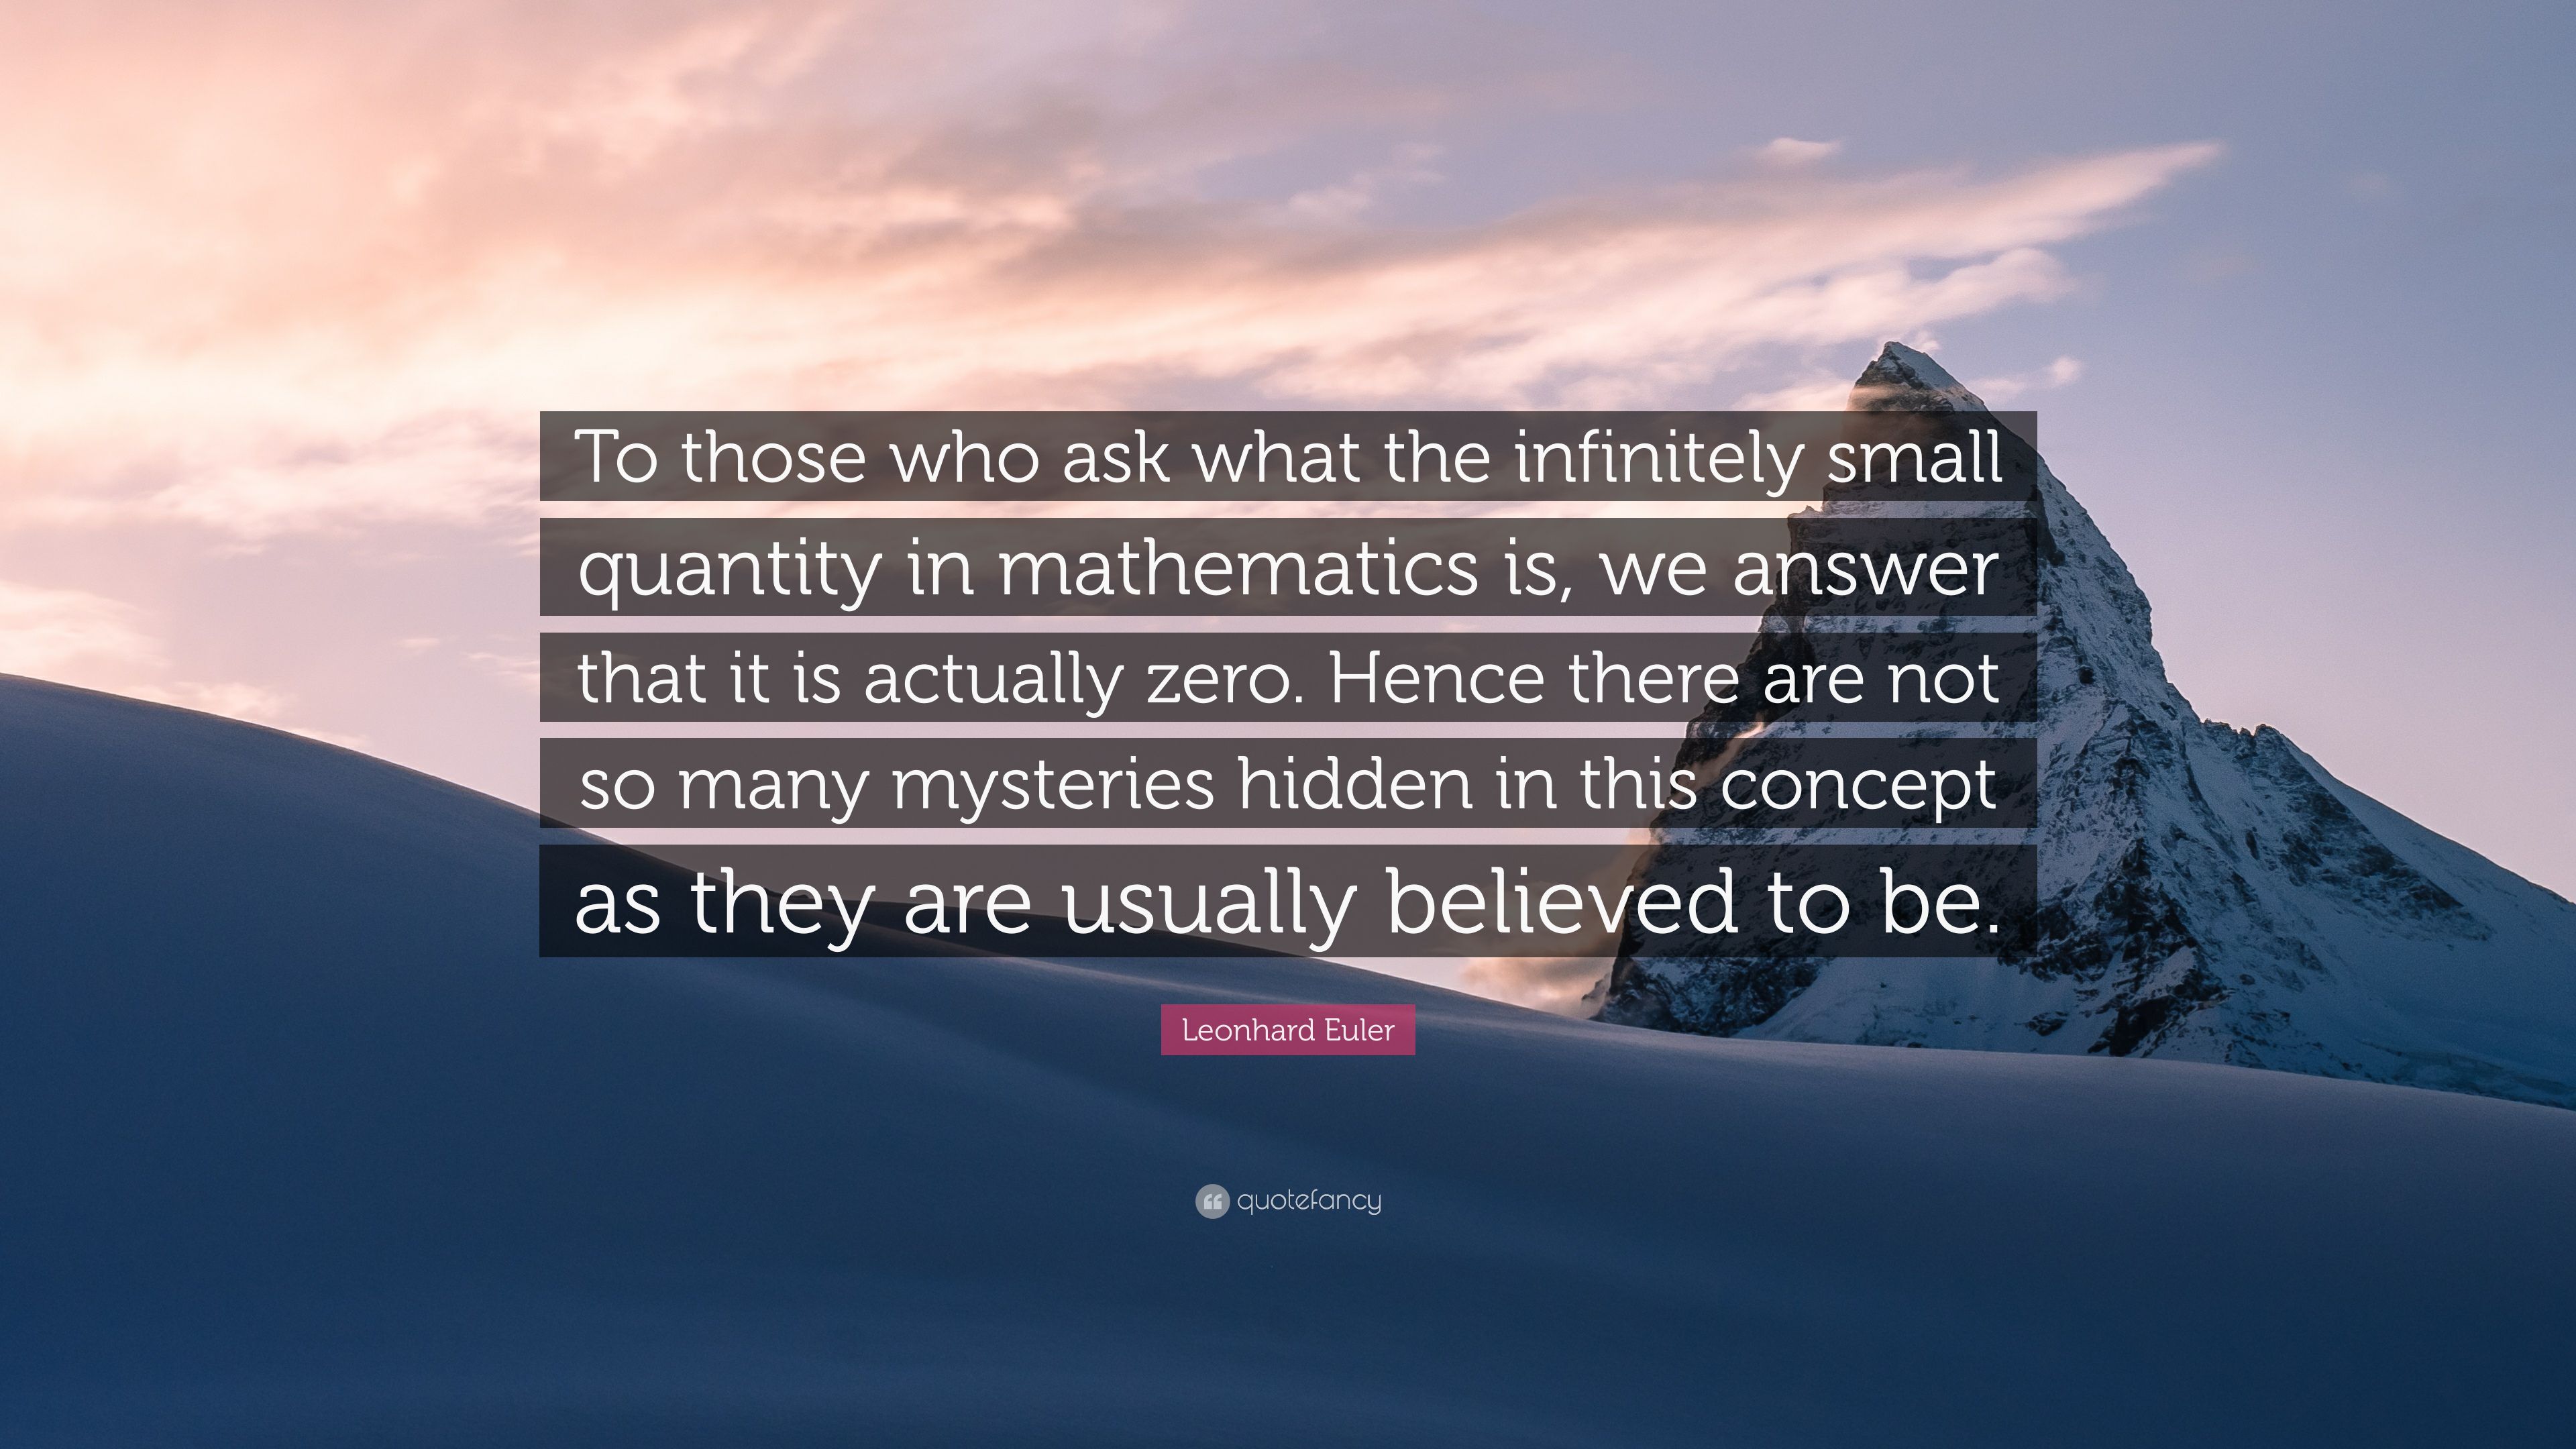 Leonhard Euler Quote: “To those who ask what the infinitely small quantity in mathematics is, we answer that it is actually zero. Hence there a.” (7 wallpaper)